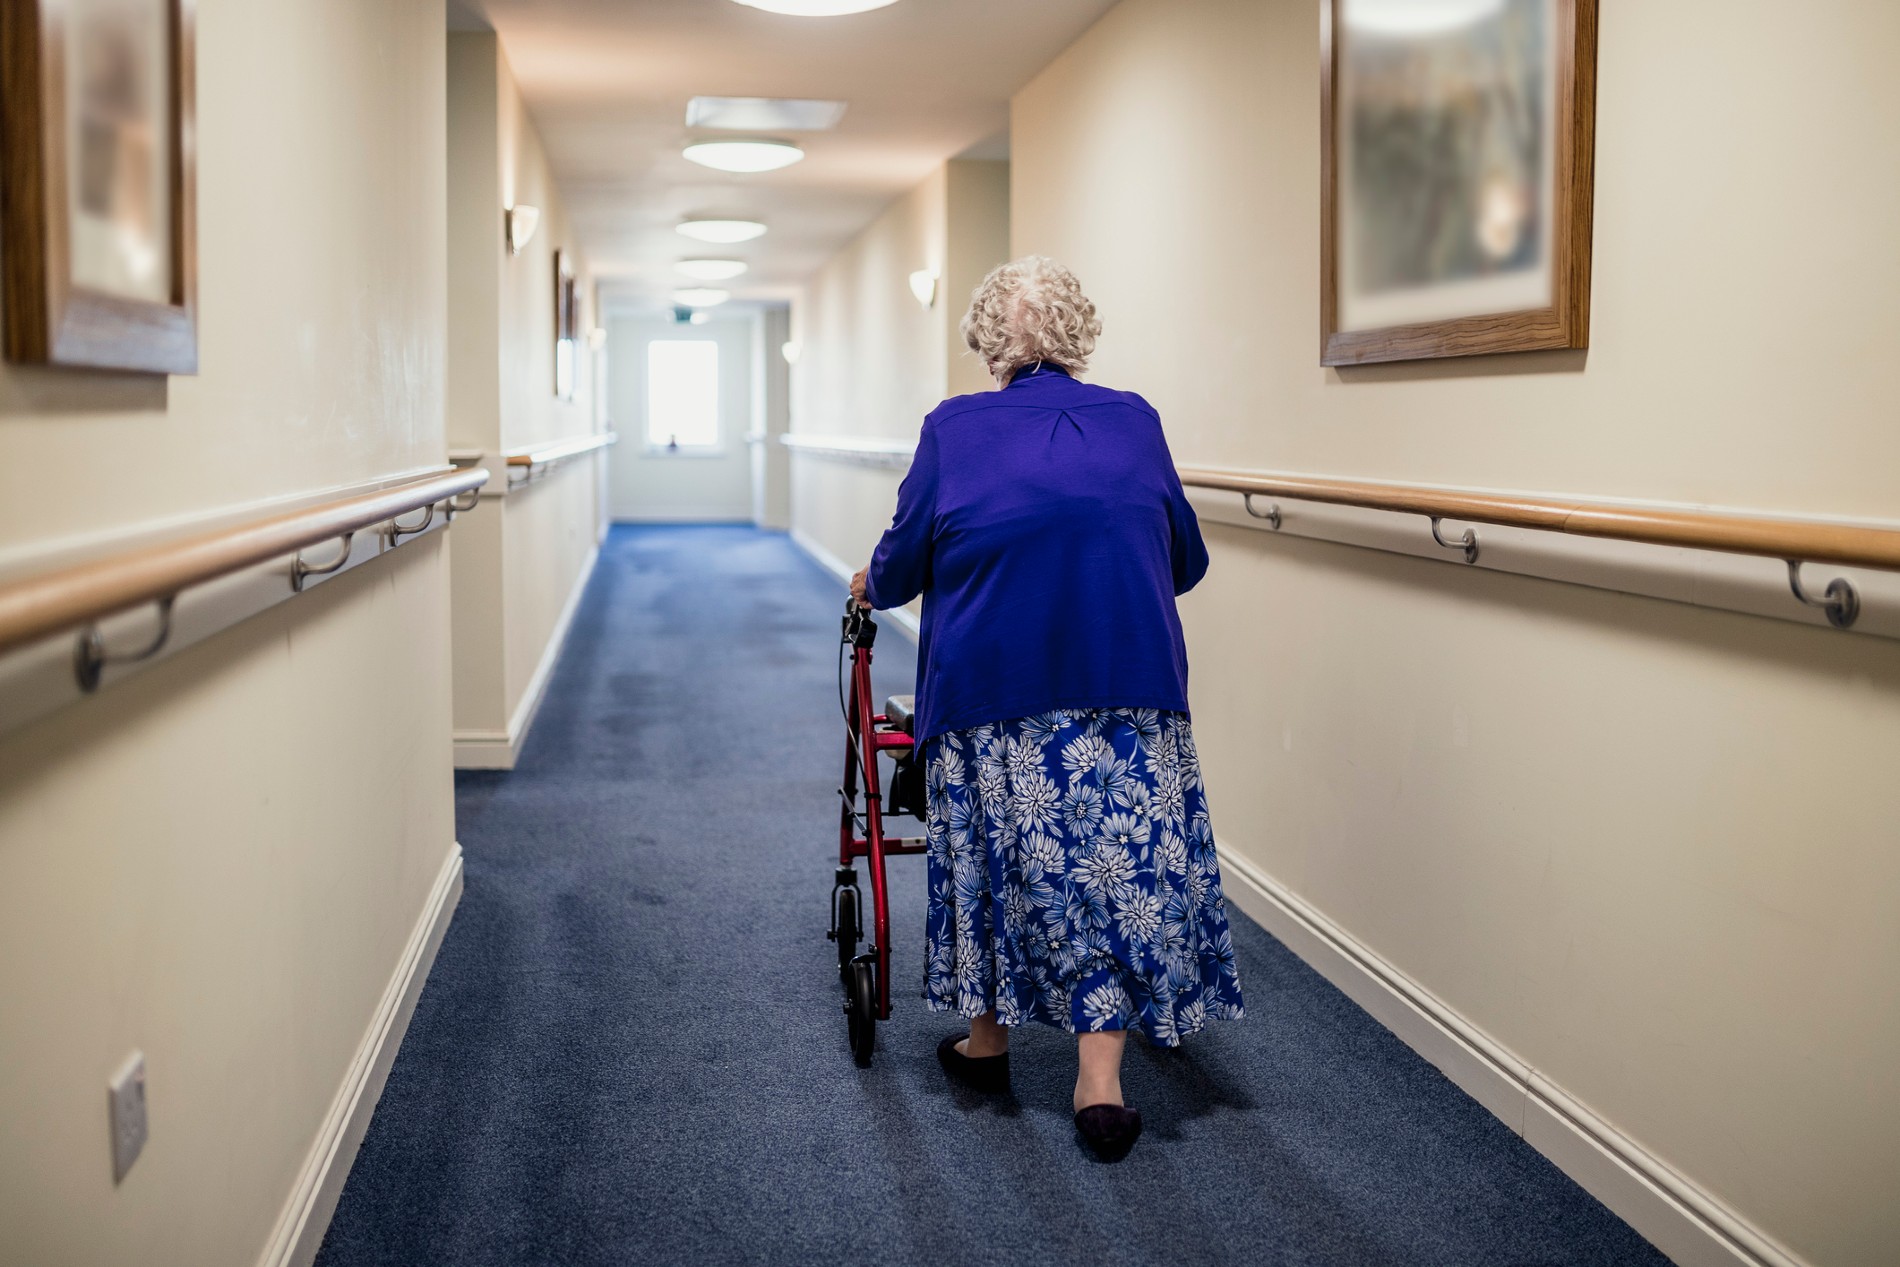 Elderly woman in care home